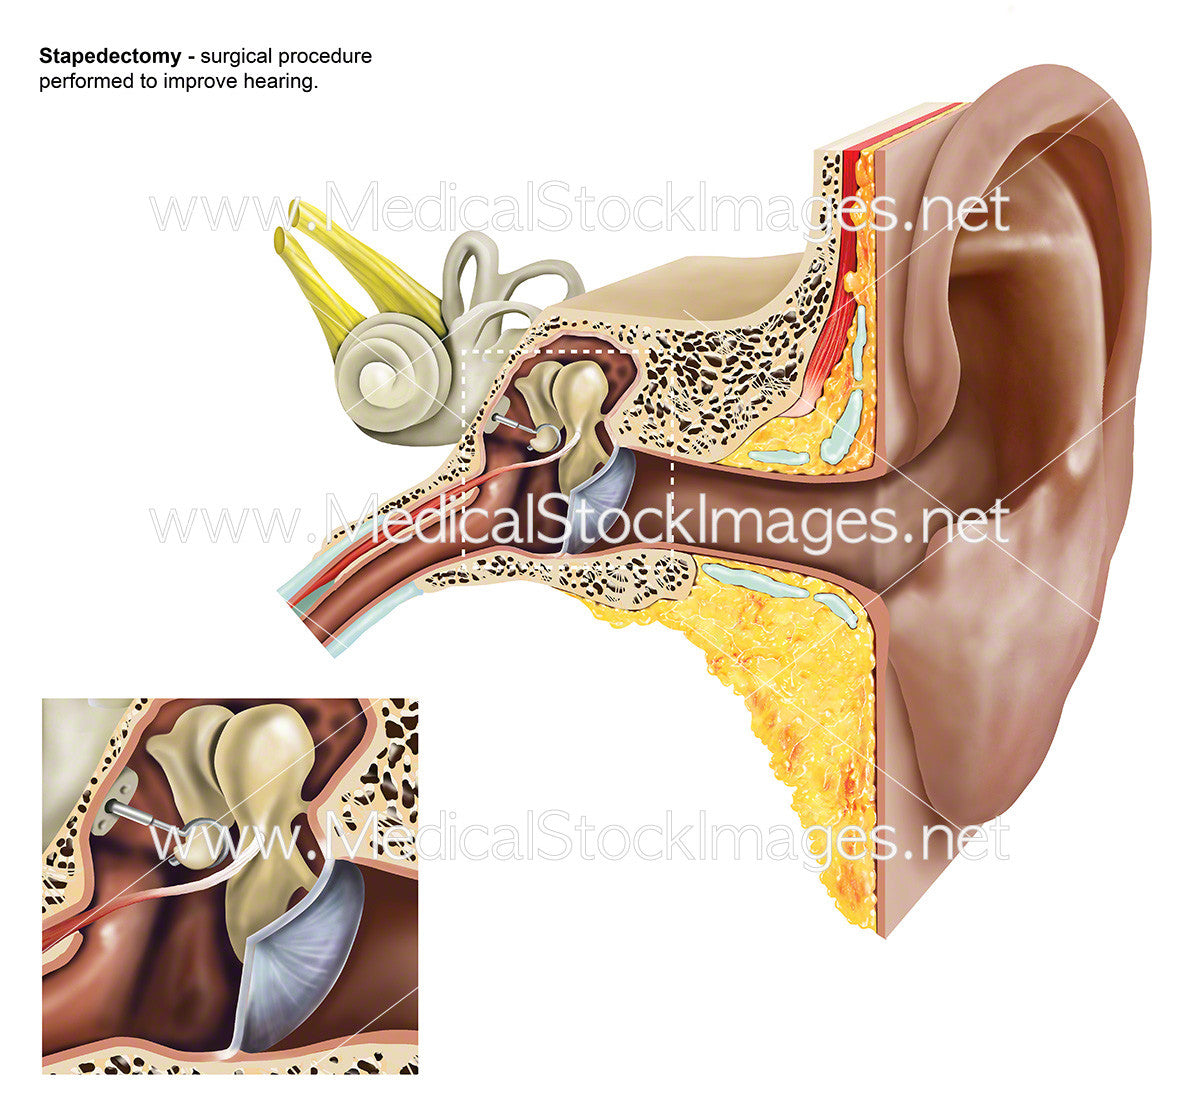 Stapedectomy of the Stapes of the Ear - Labelled – Medical Stock